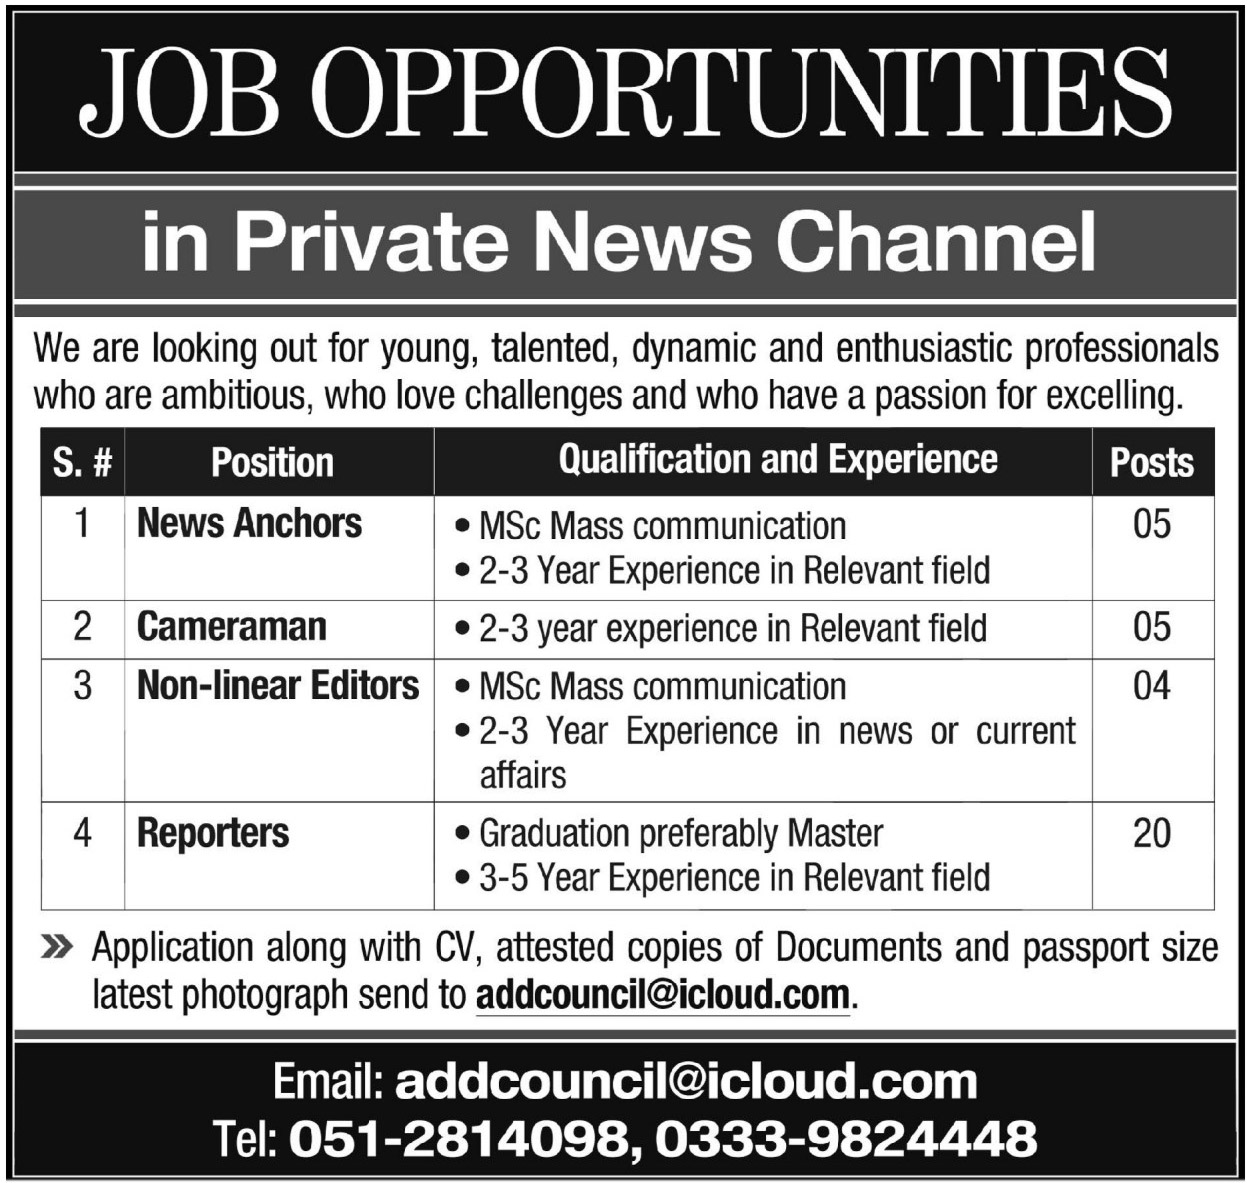 Jobs in a Private News Channel 06 June 2018